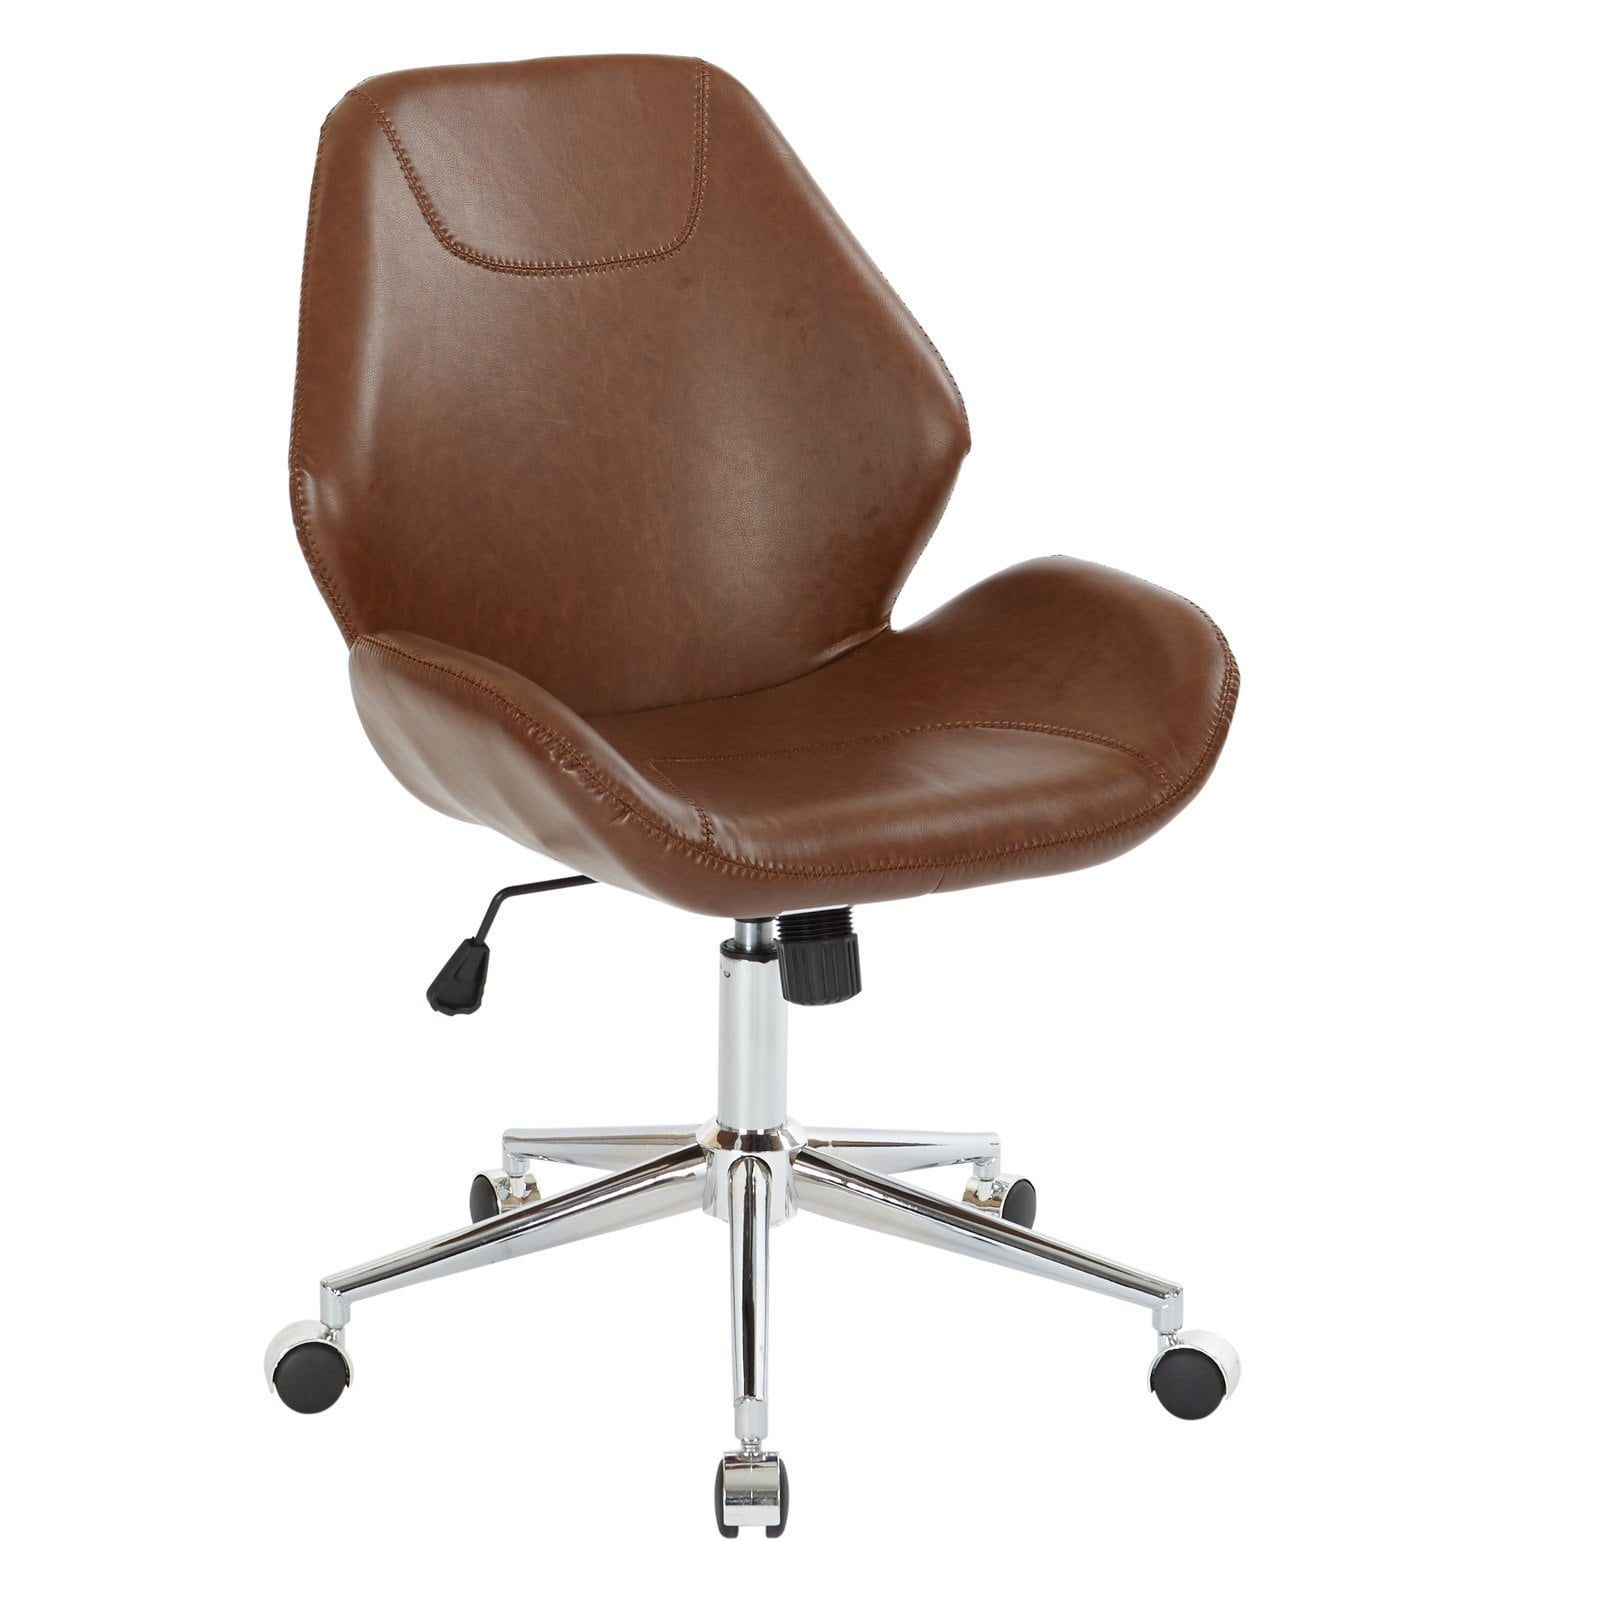 Chatsworth Swivel Executive Office Chair in Saddle Brown Faux Leather